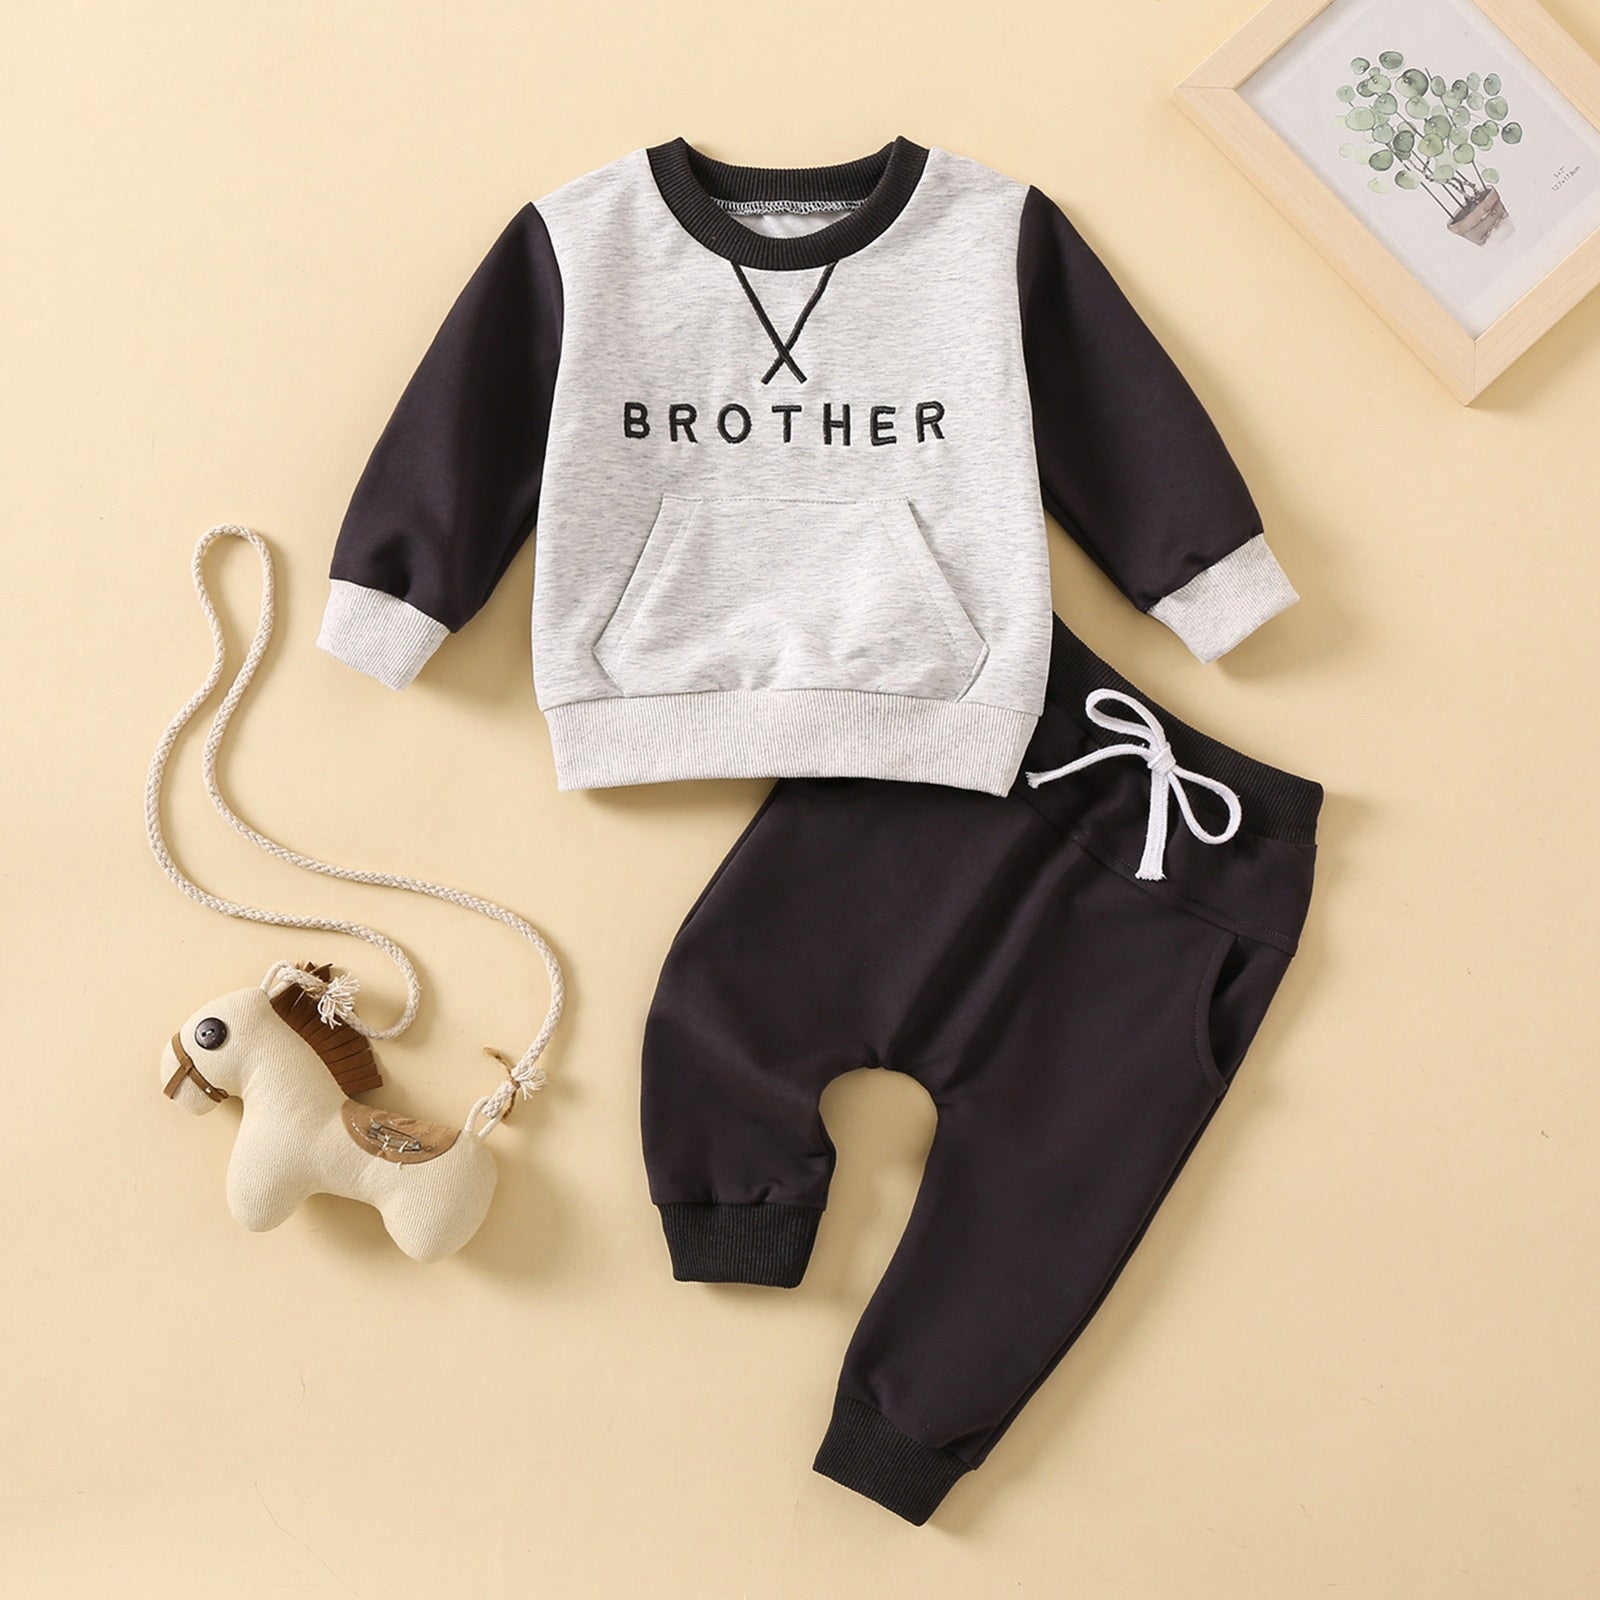 Bank Reversible Jacket Newborn Infant Baby Unisex Cotton letter outfit for girls